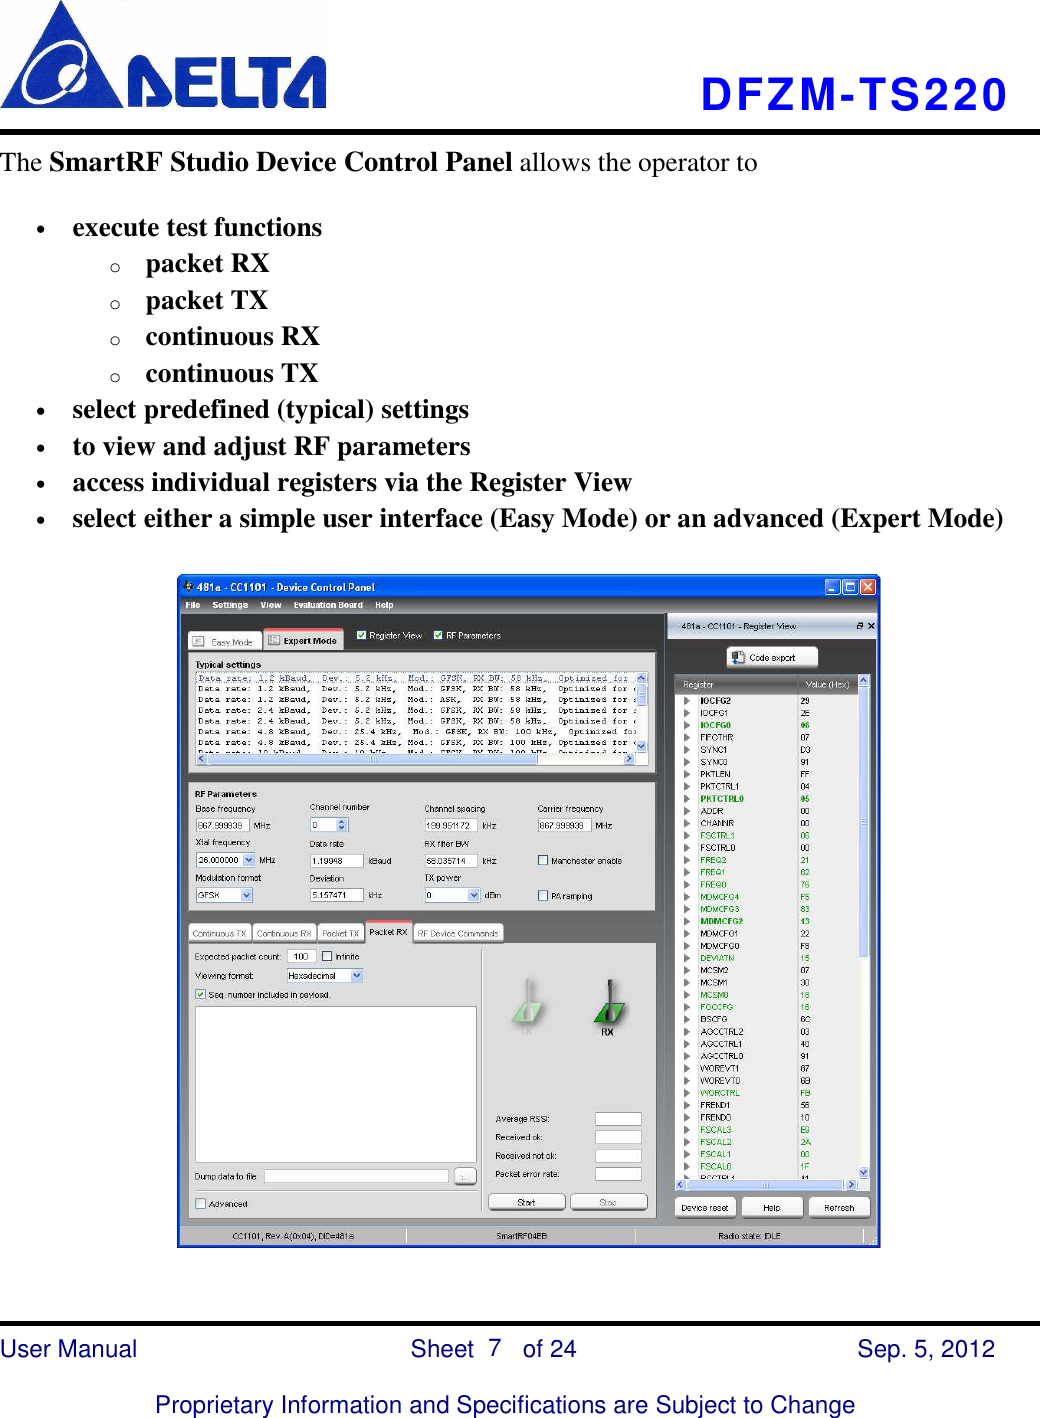    DFZM-TS220    User Manual                            Sheet        of 24      Sep. 5, 2012  Proprietary Information and Specifications are Subject to Change 7 The SmartRF Studio Device Control Panel allows the operator to • execute test functions o packet RX o packet TX o continuous RX o continuous TX • select predefined (typical) settings • to view and adjust RF parameters • access individual registers via the Register View • select either a simple user interface (Easy Mode) or an advanced (Expert Mode)  